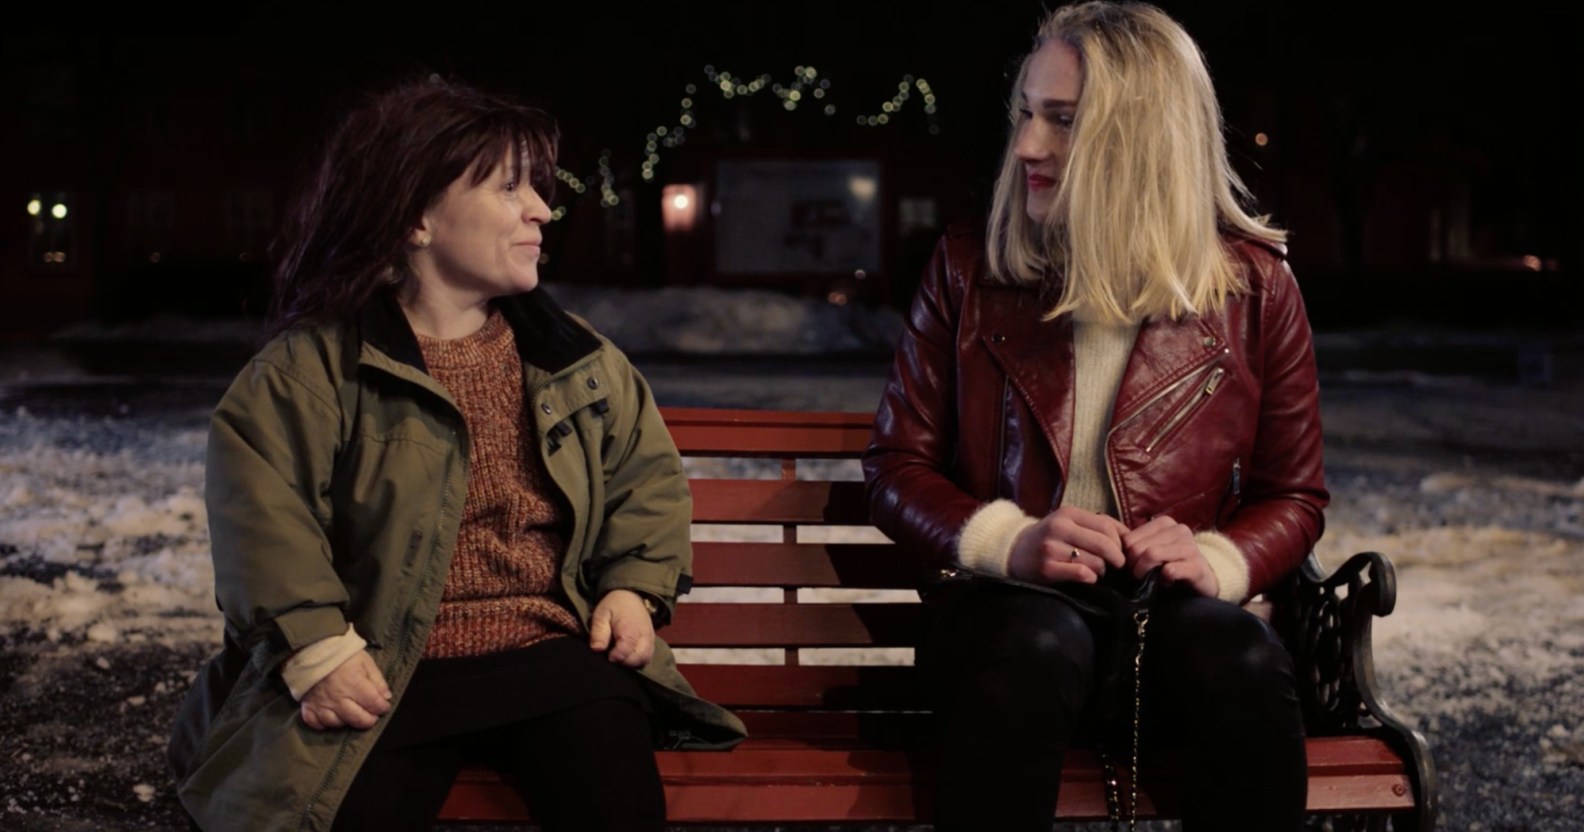 Sigrid Kandal Husjord as Ebba (left) and with Ola Hoemsnes Sandum as Ariel (right) in the Oscar-nominated short film Night Ride.